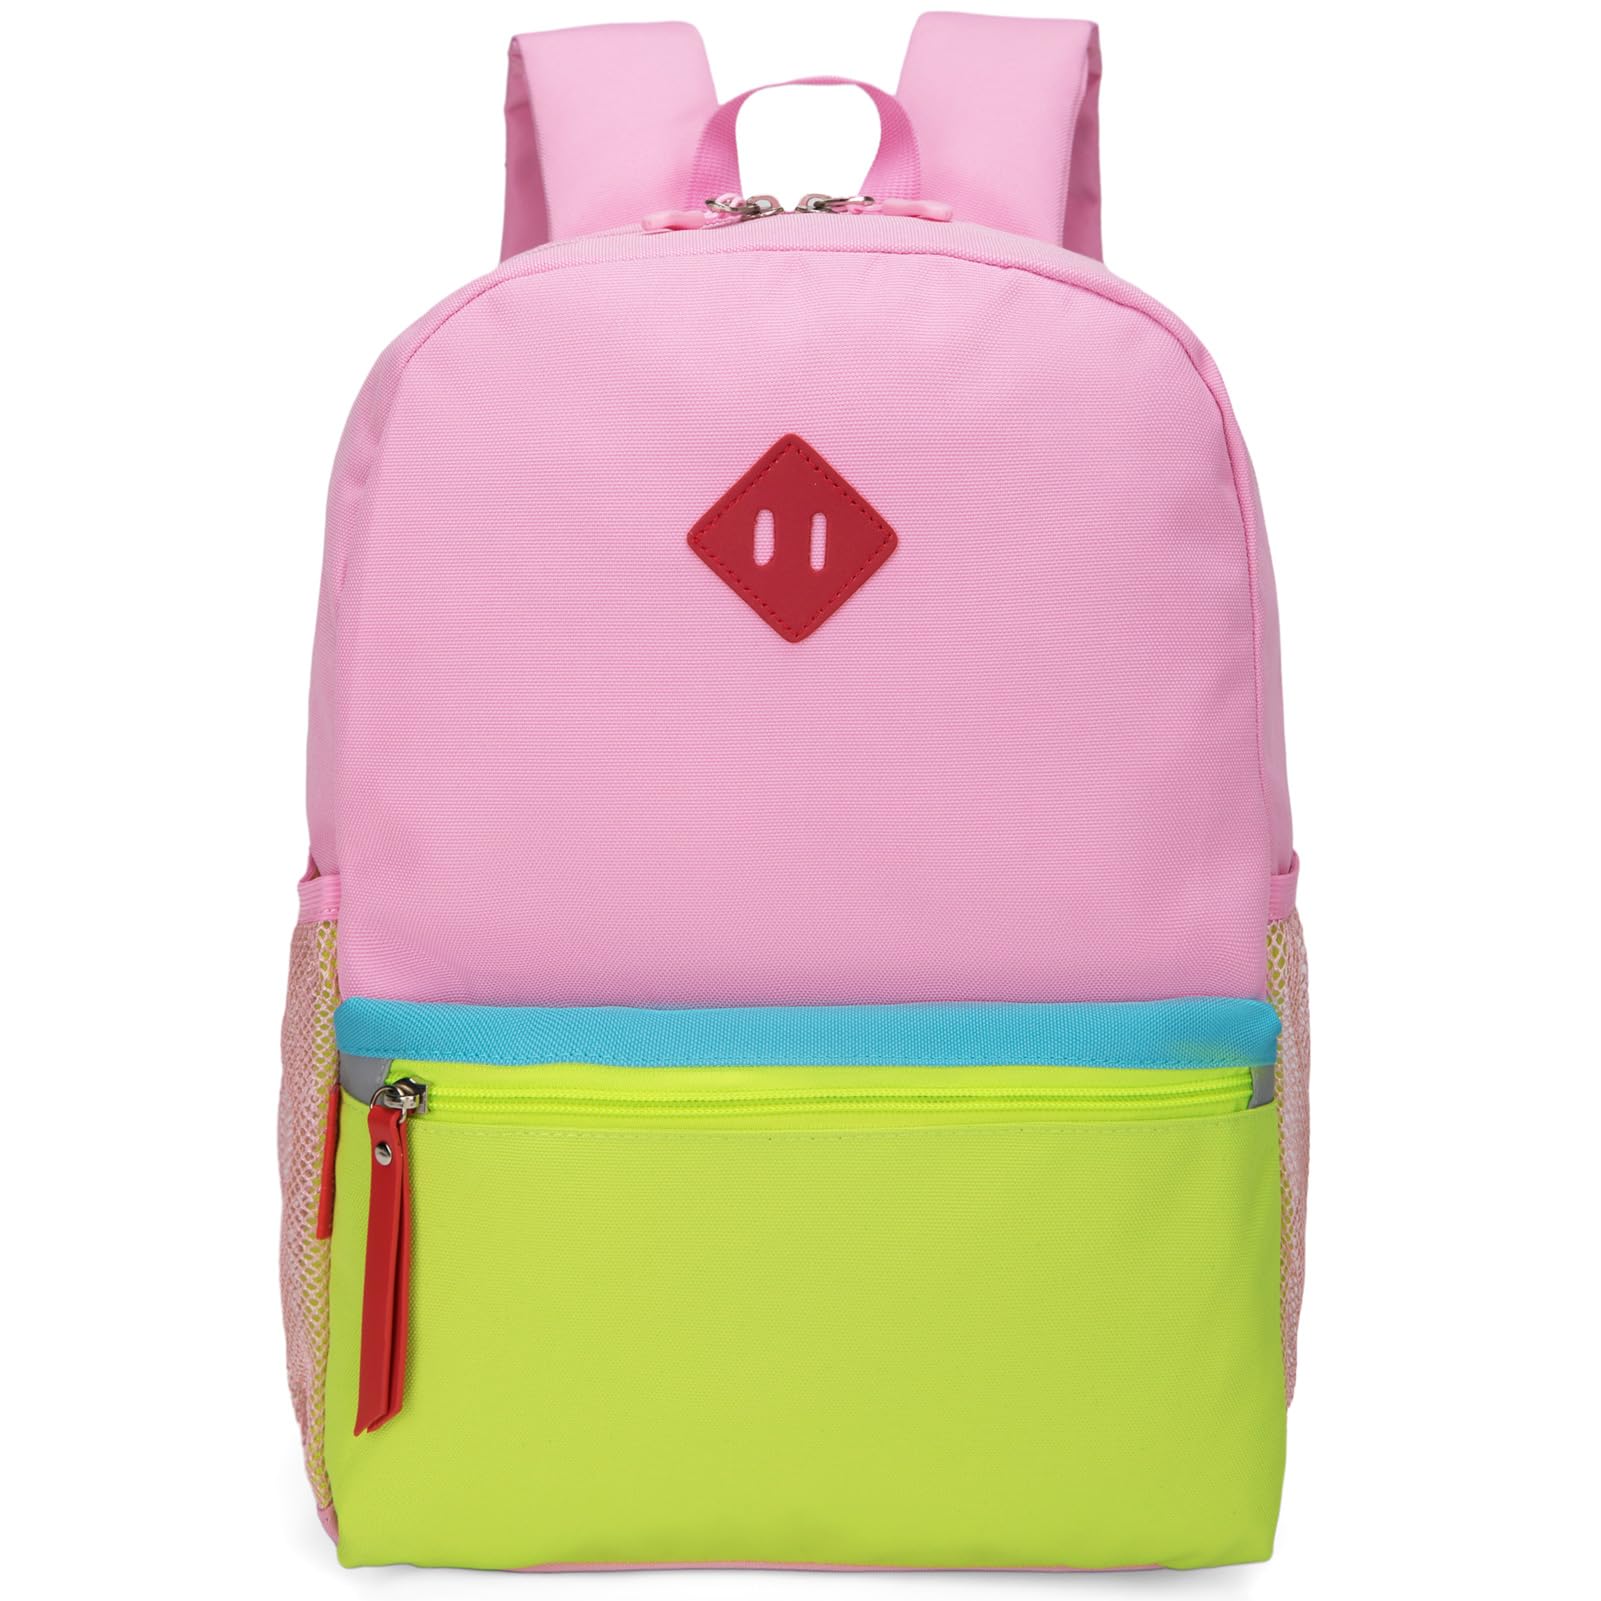 18 X HAWLANDER LITTLE KIDS BACKPACK, TODDLER SCHOOL BAG FOR GIRLS AGED 4 5 6 7 YEARS, WITH CHEST STRAP, PINK YELLOW - TOTAL RRP £270: LOCATION - RACK B